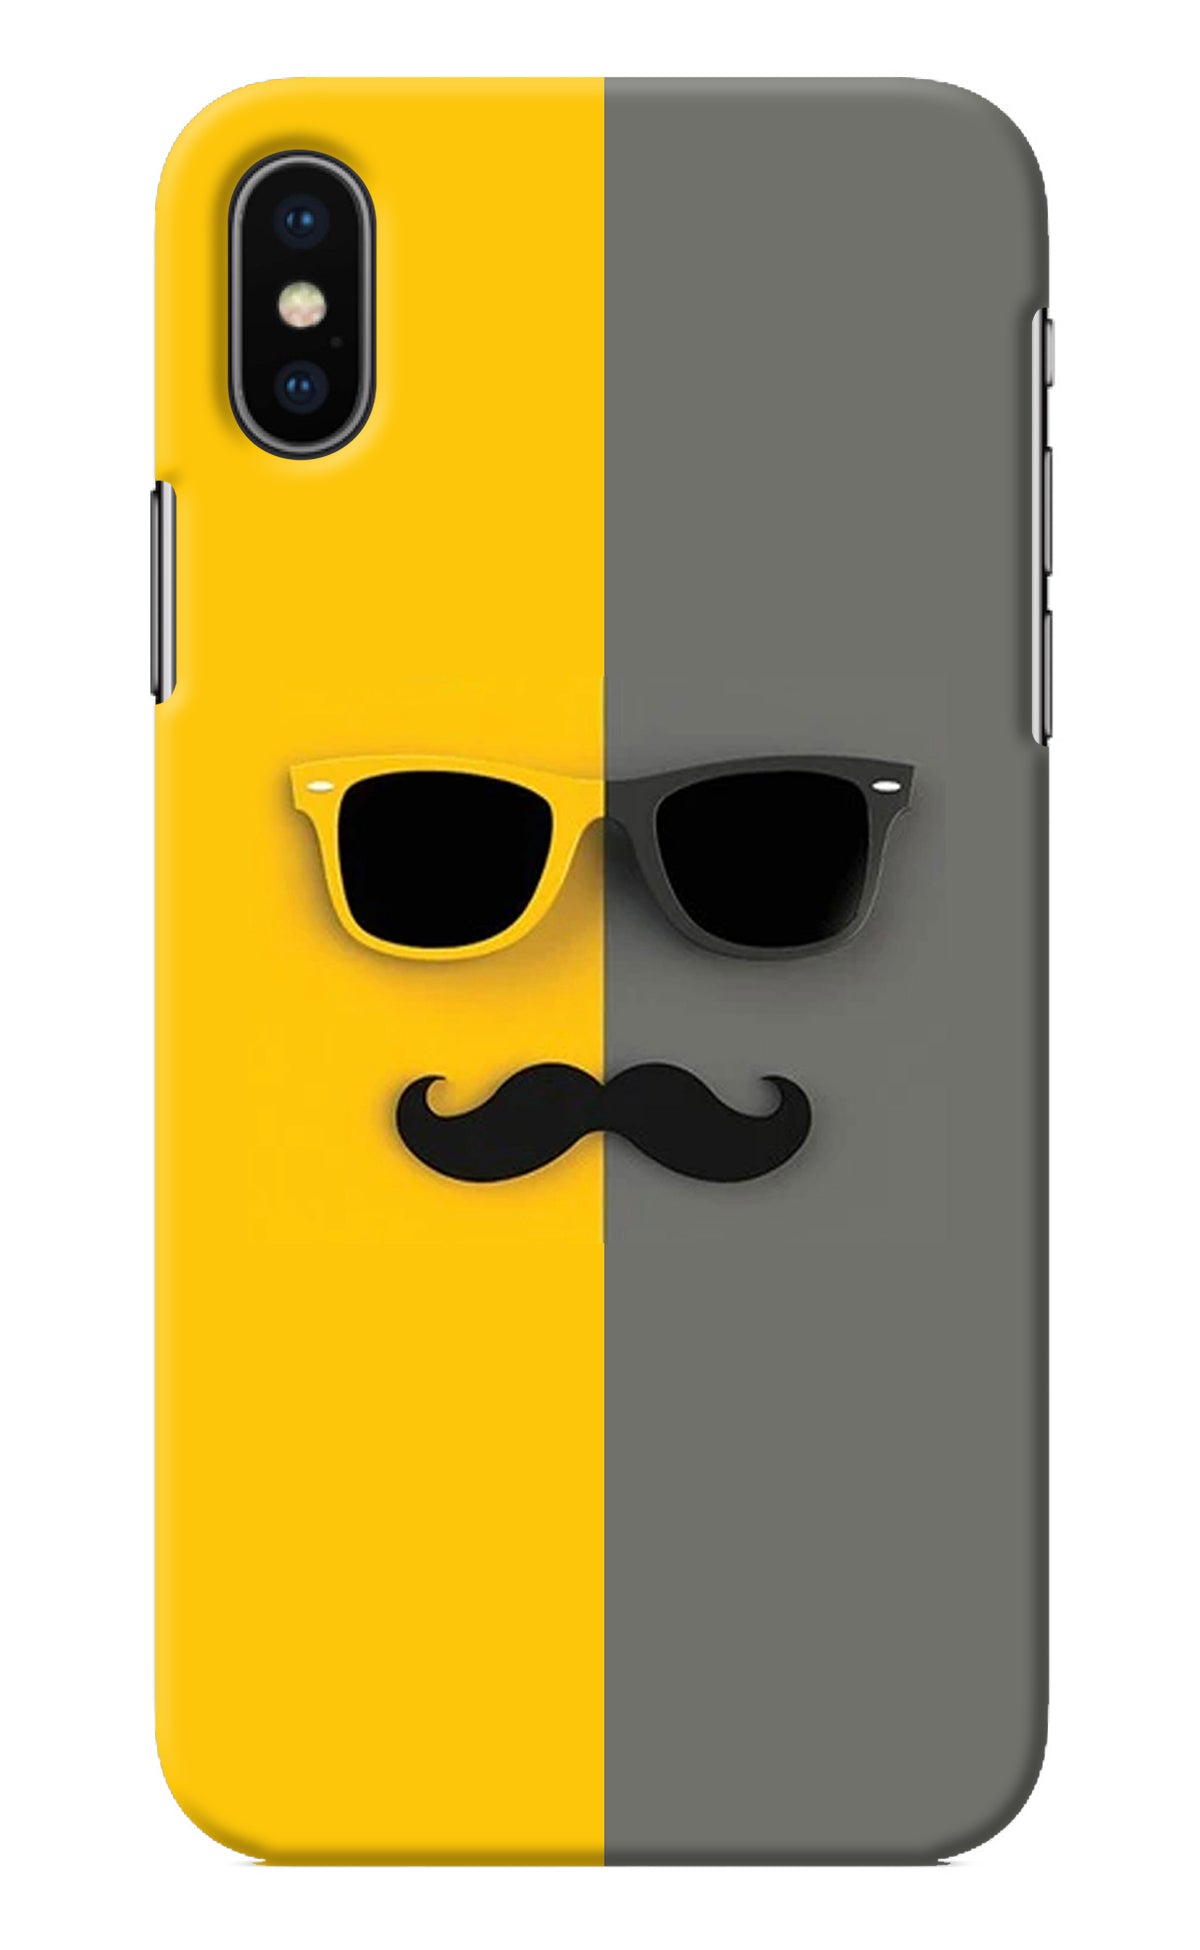 Sunglasses with Mustache iPhone X Back Cover